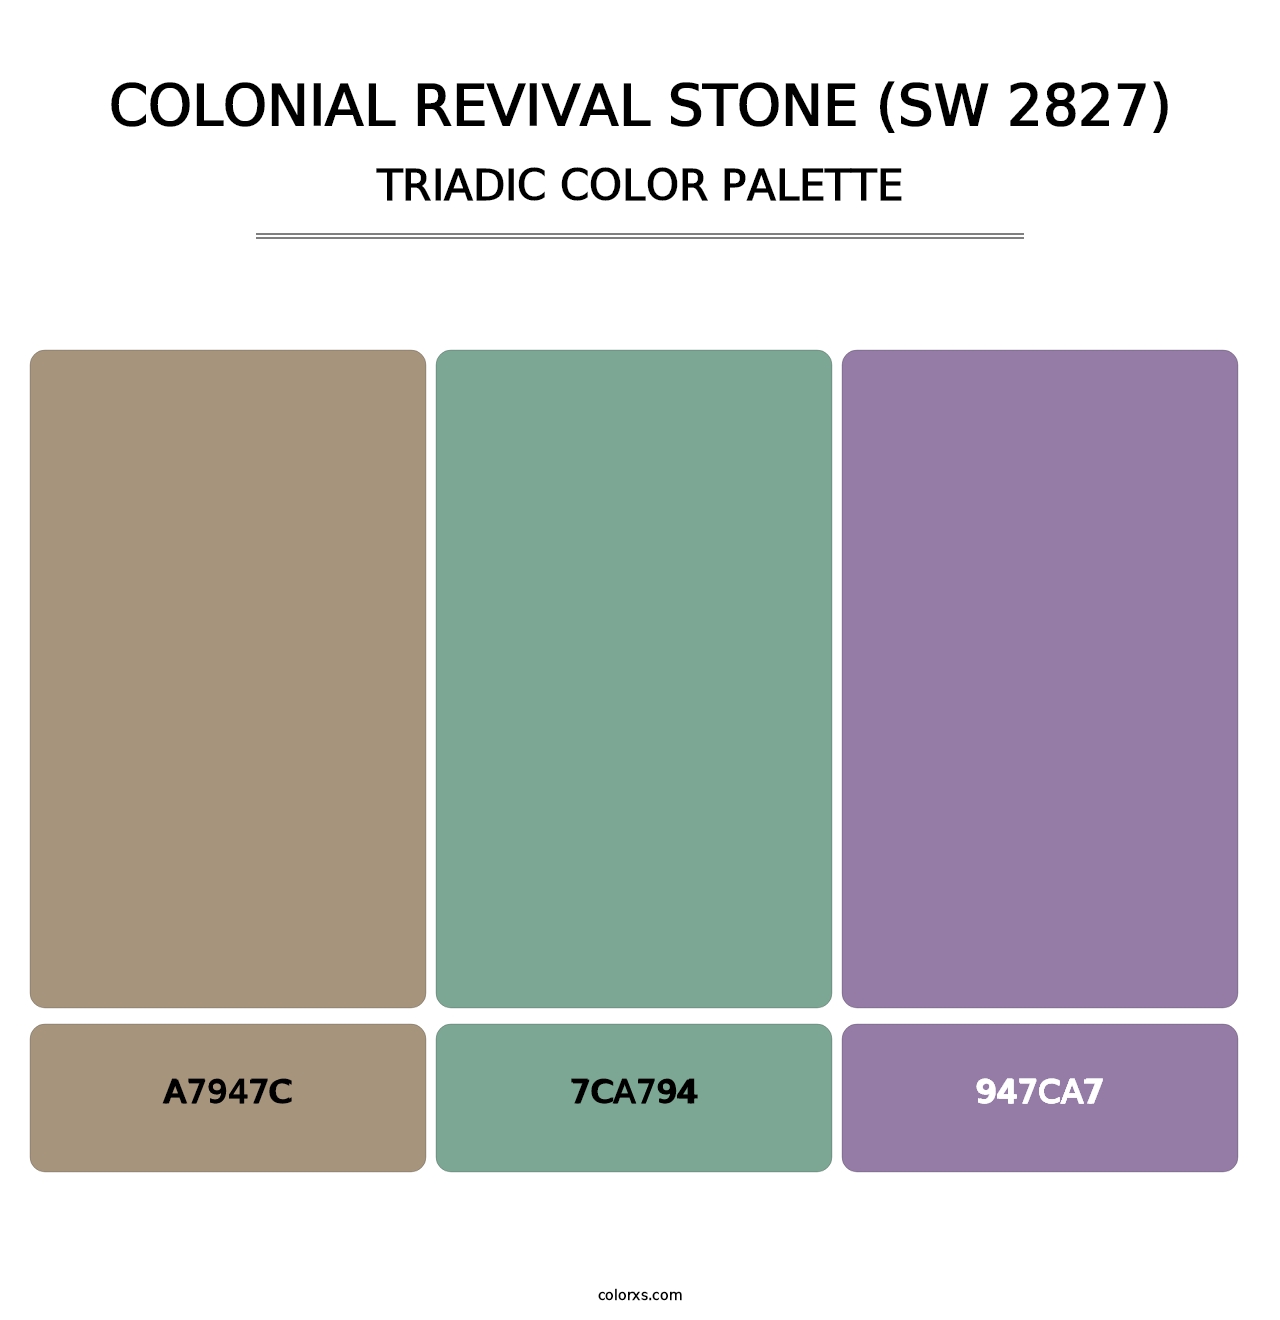 Colonial Revival Stone (SW 2827) - Triadic Color Palette